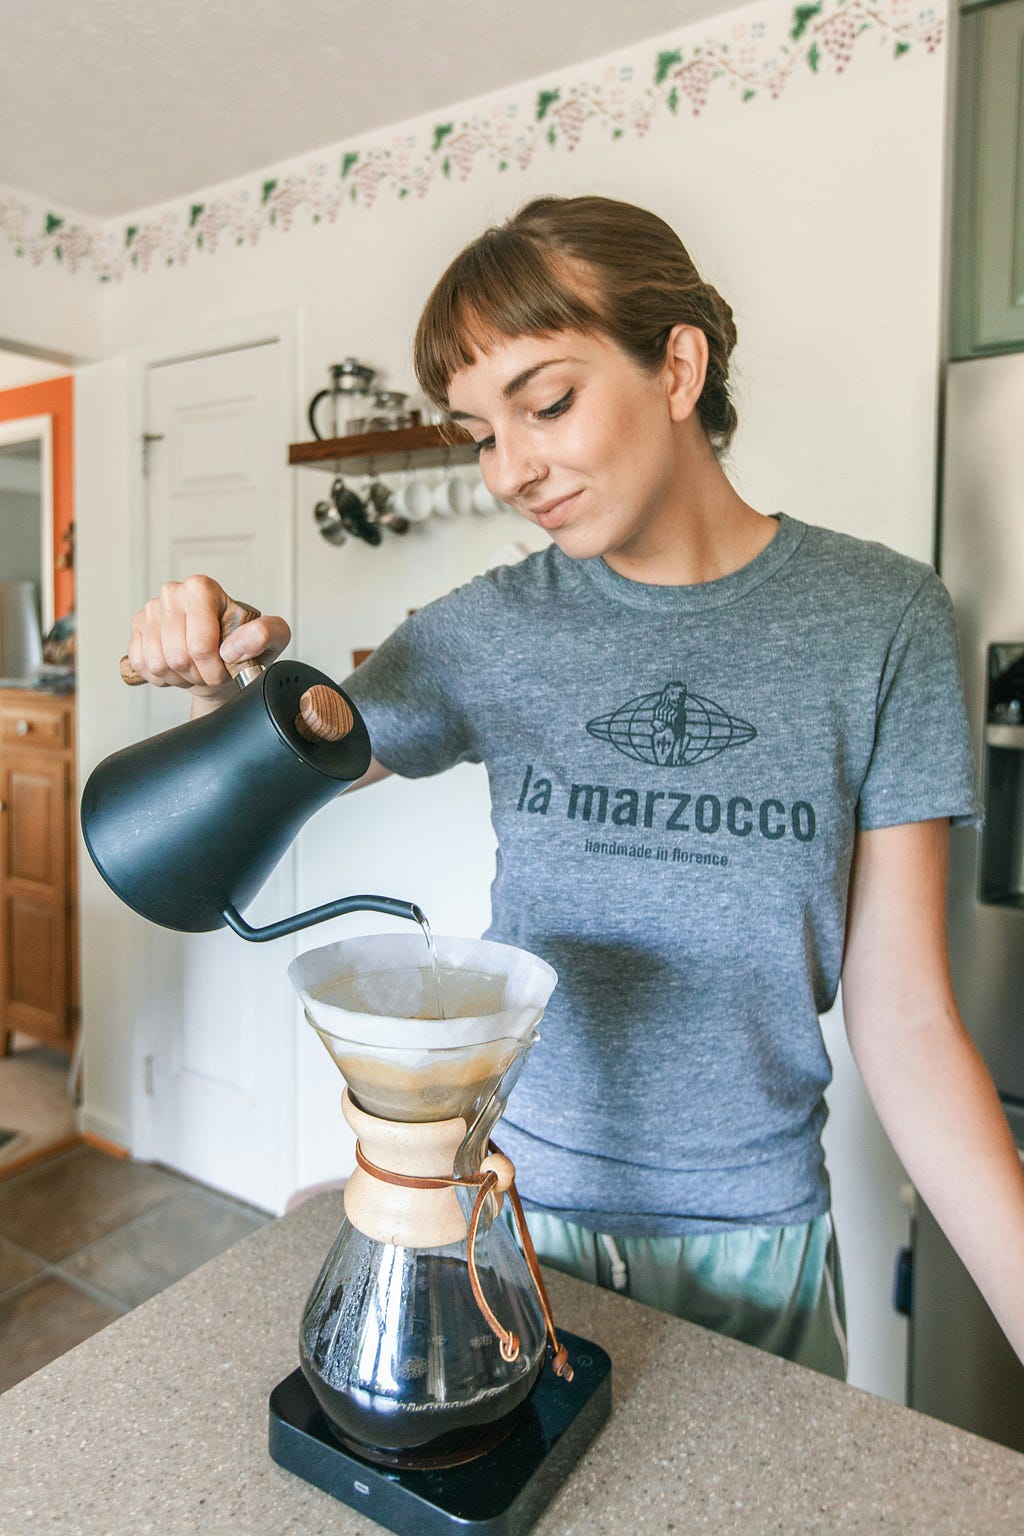 a young woman, happily adding warm water to her home brew coffee in her kitchen